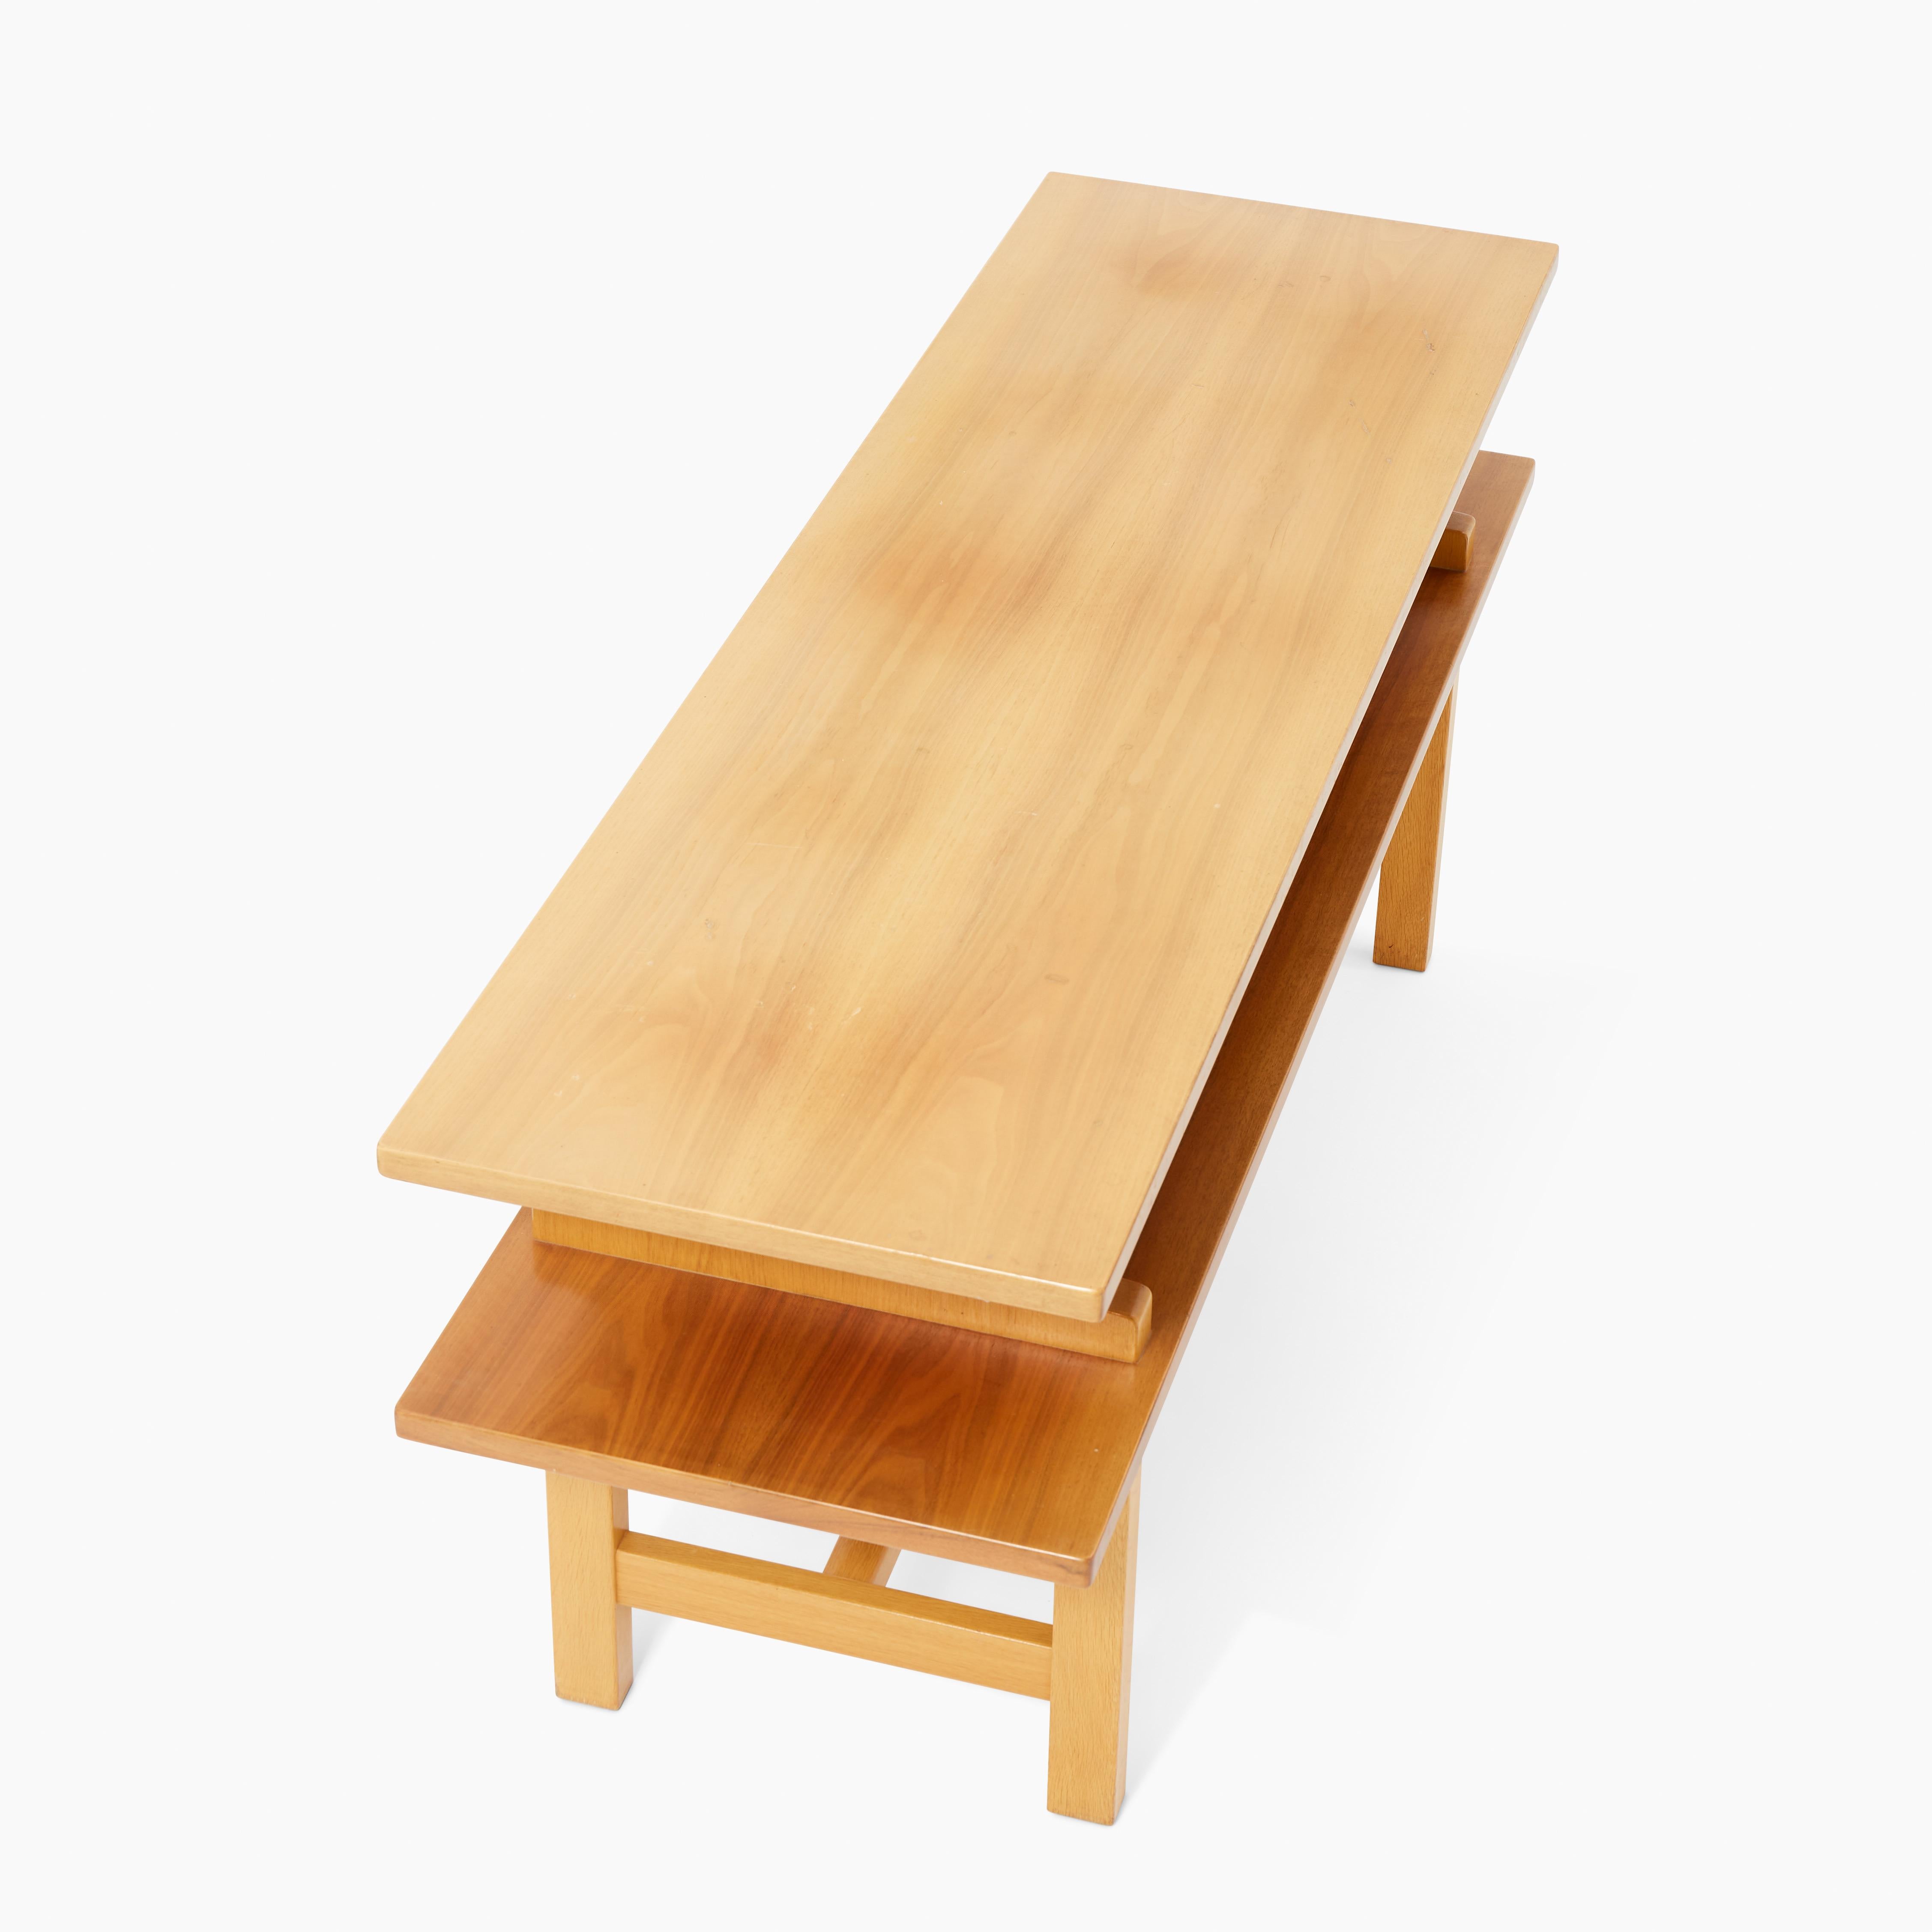 Important and discontinued piece by Josef Frank for Svenskt Tenn. Designed in 1951. Top in Walnut and legs in oak. 180cm long, 55 width, 75 height